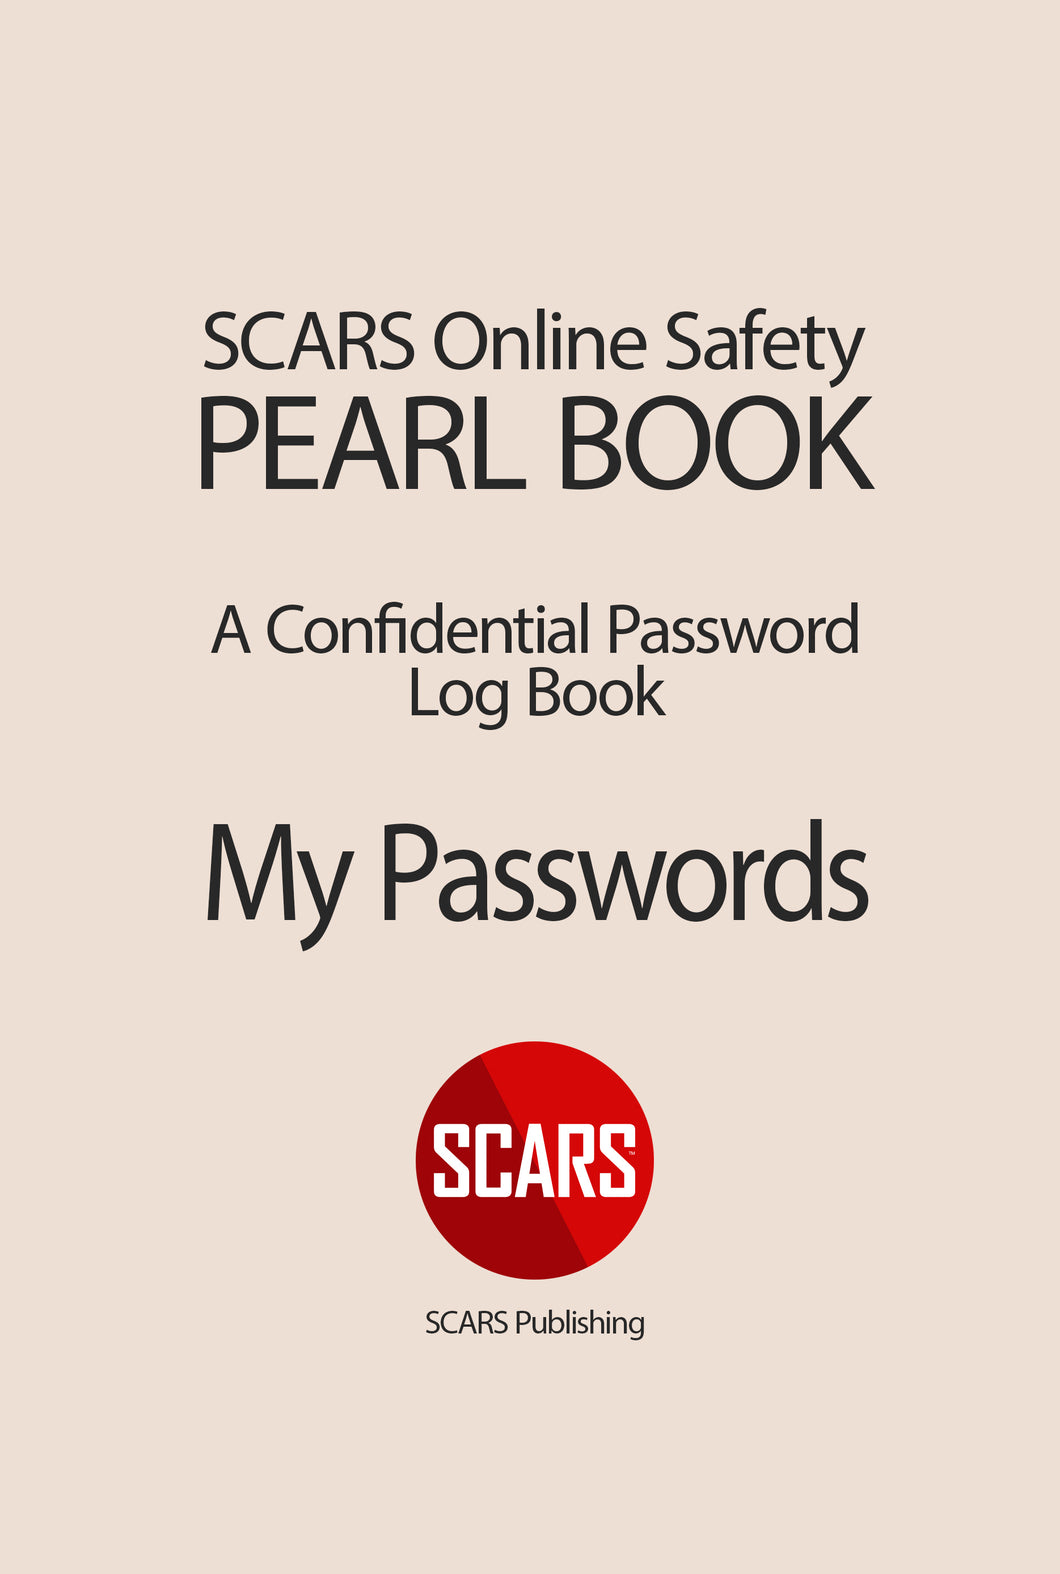 SCARS PEARL BOOK - The SCARS Online Safety Password Log Book